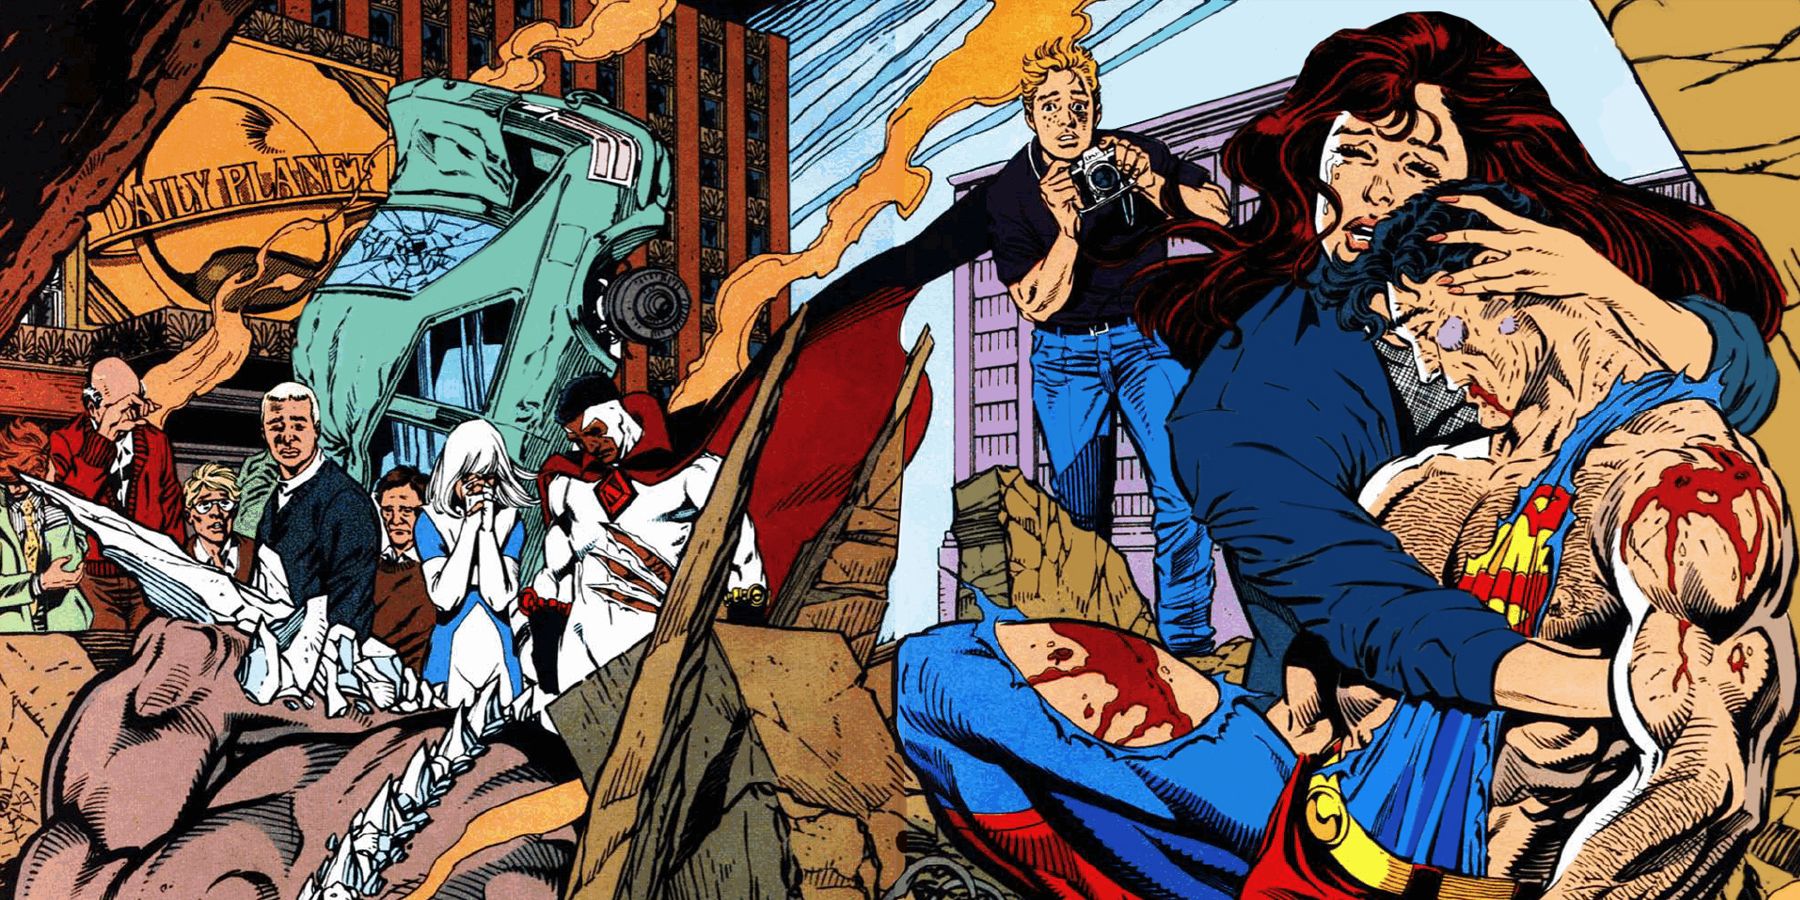 An image of Lois Lane holding a dying Superman in the comic, The Death of Superman